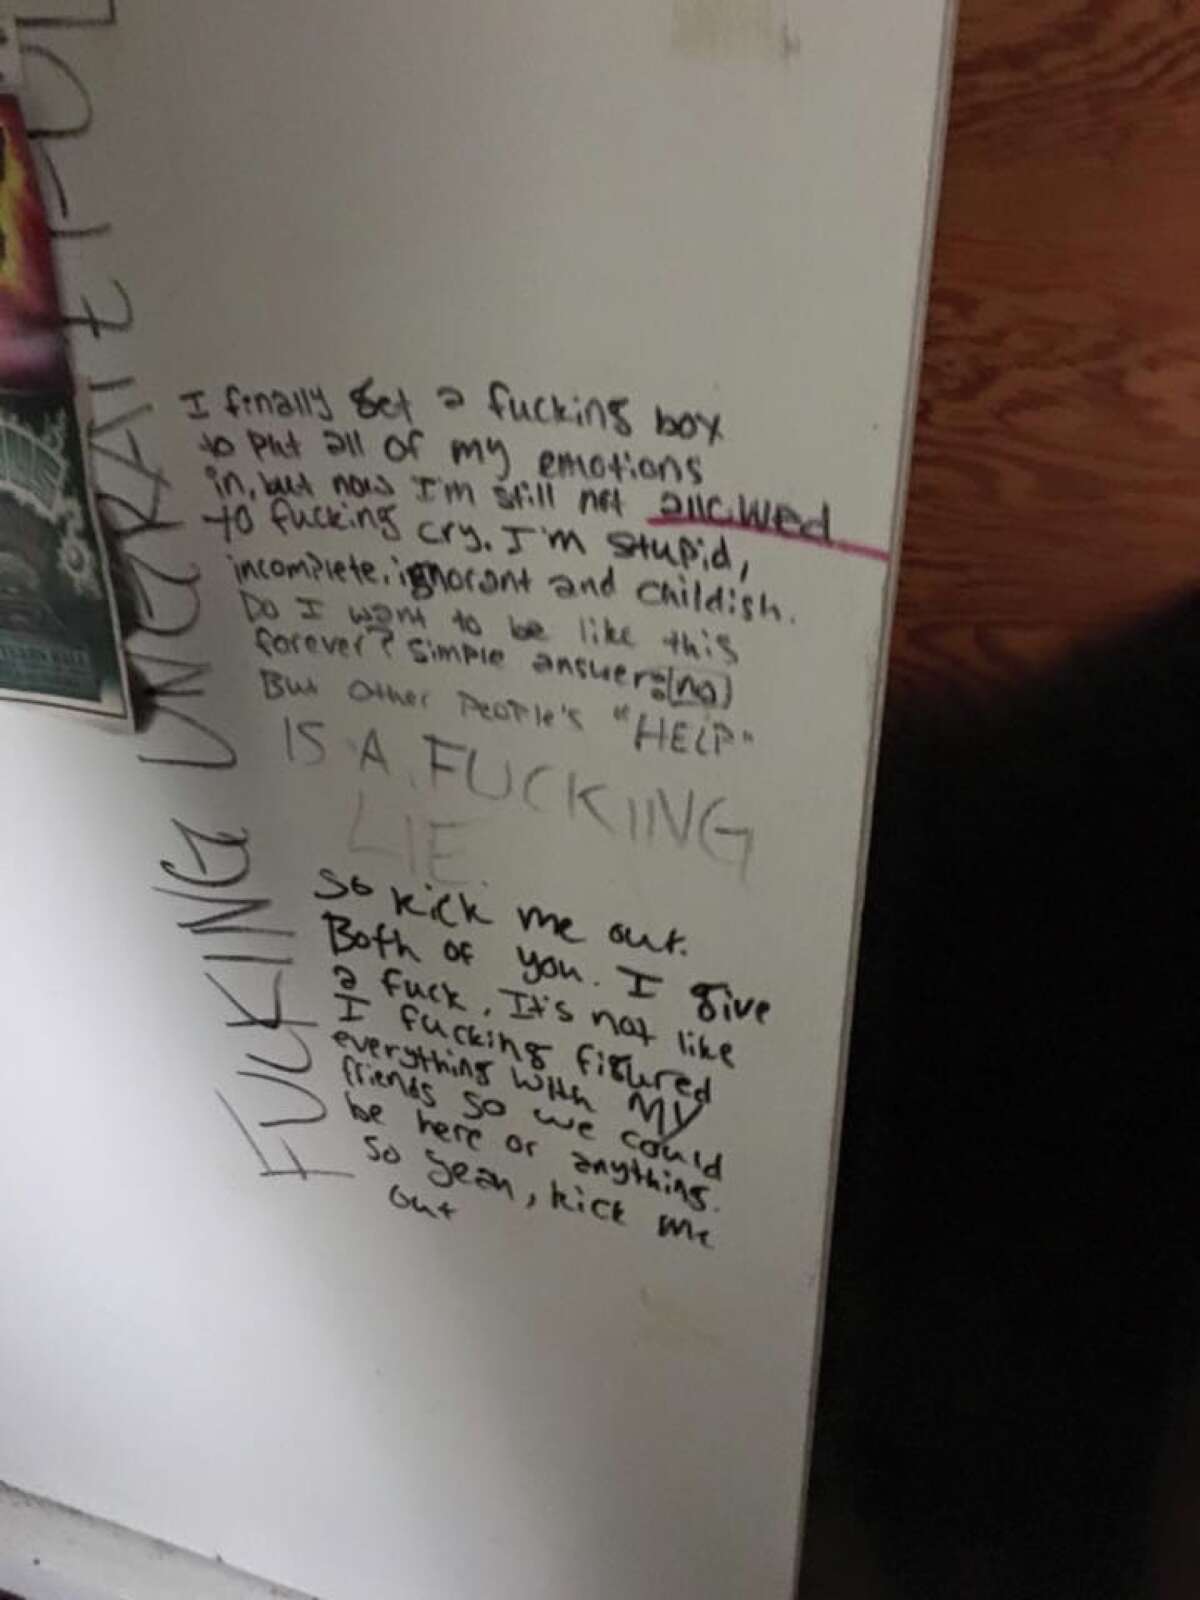 While touring the fixer-upper at 708-710 Buchanan St., a Reddit user who goes by ElroySF came across what he thinks is a note from squatters who inhabited the property at one time.